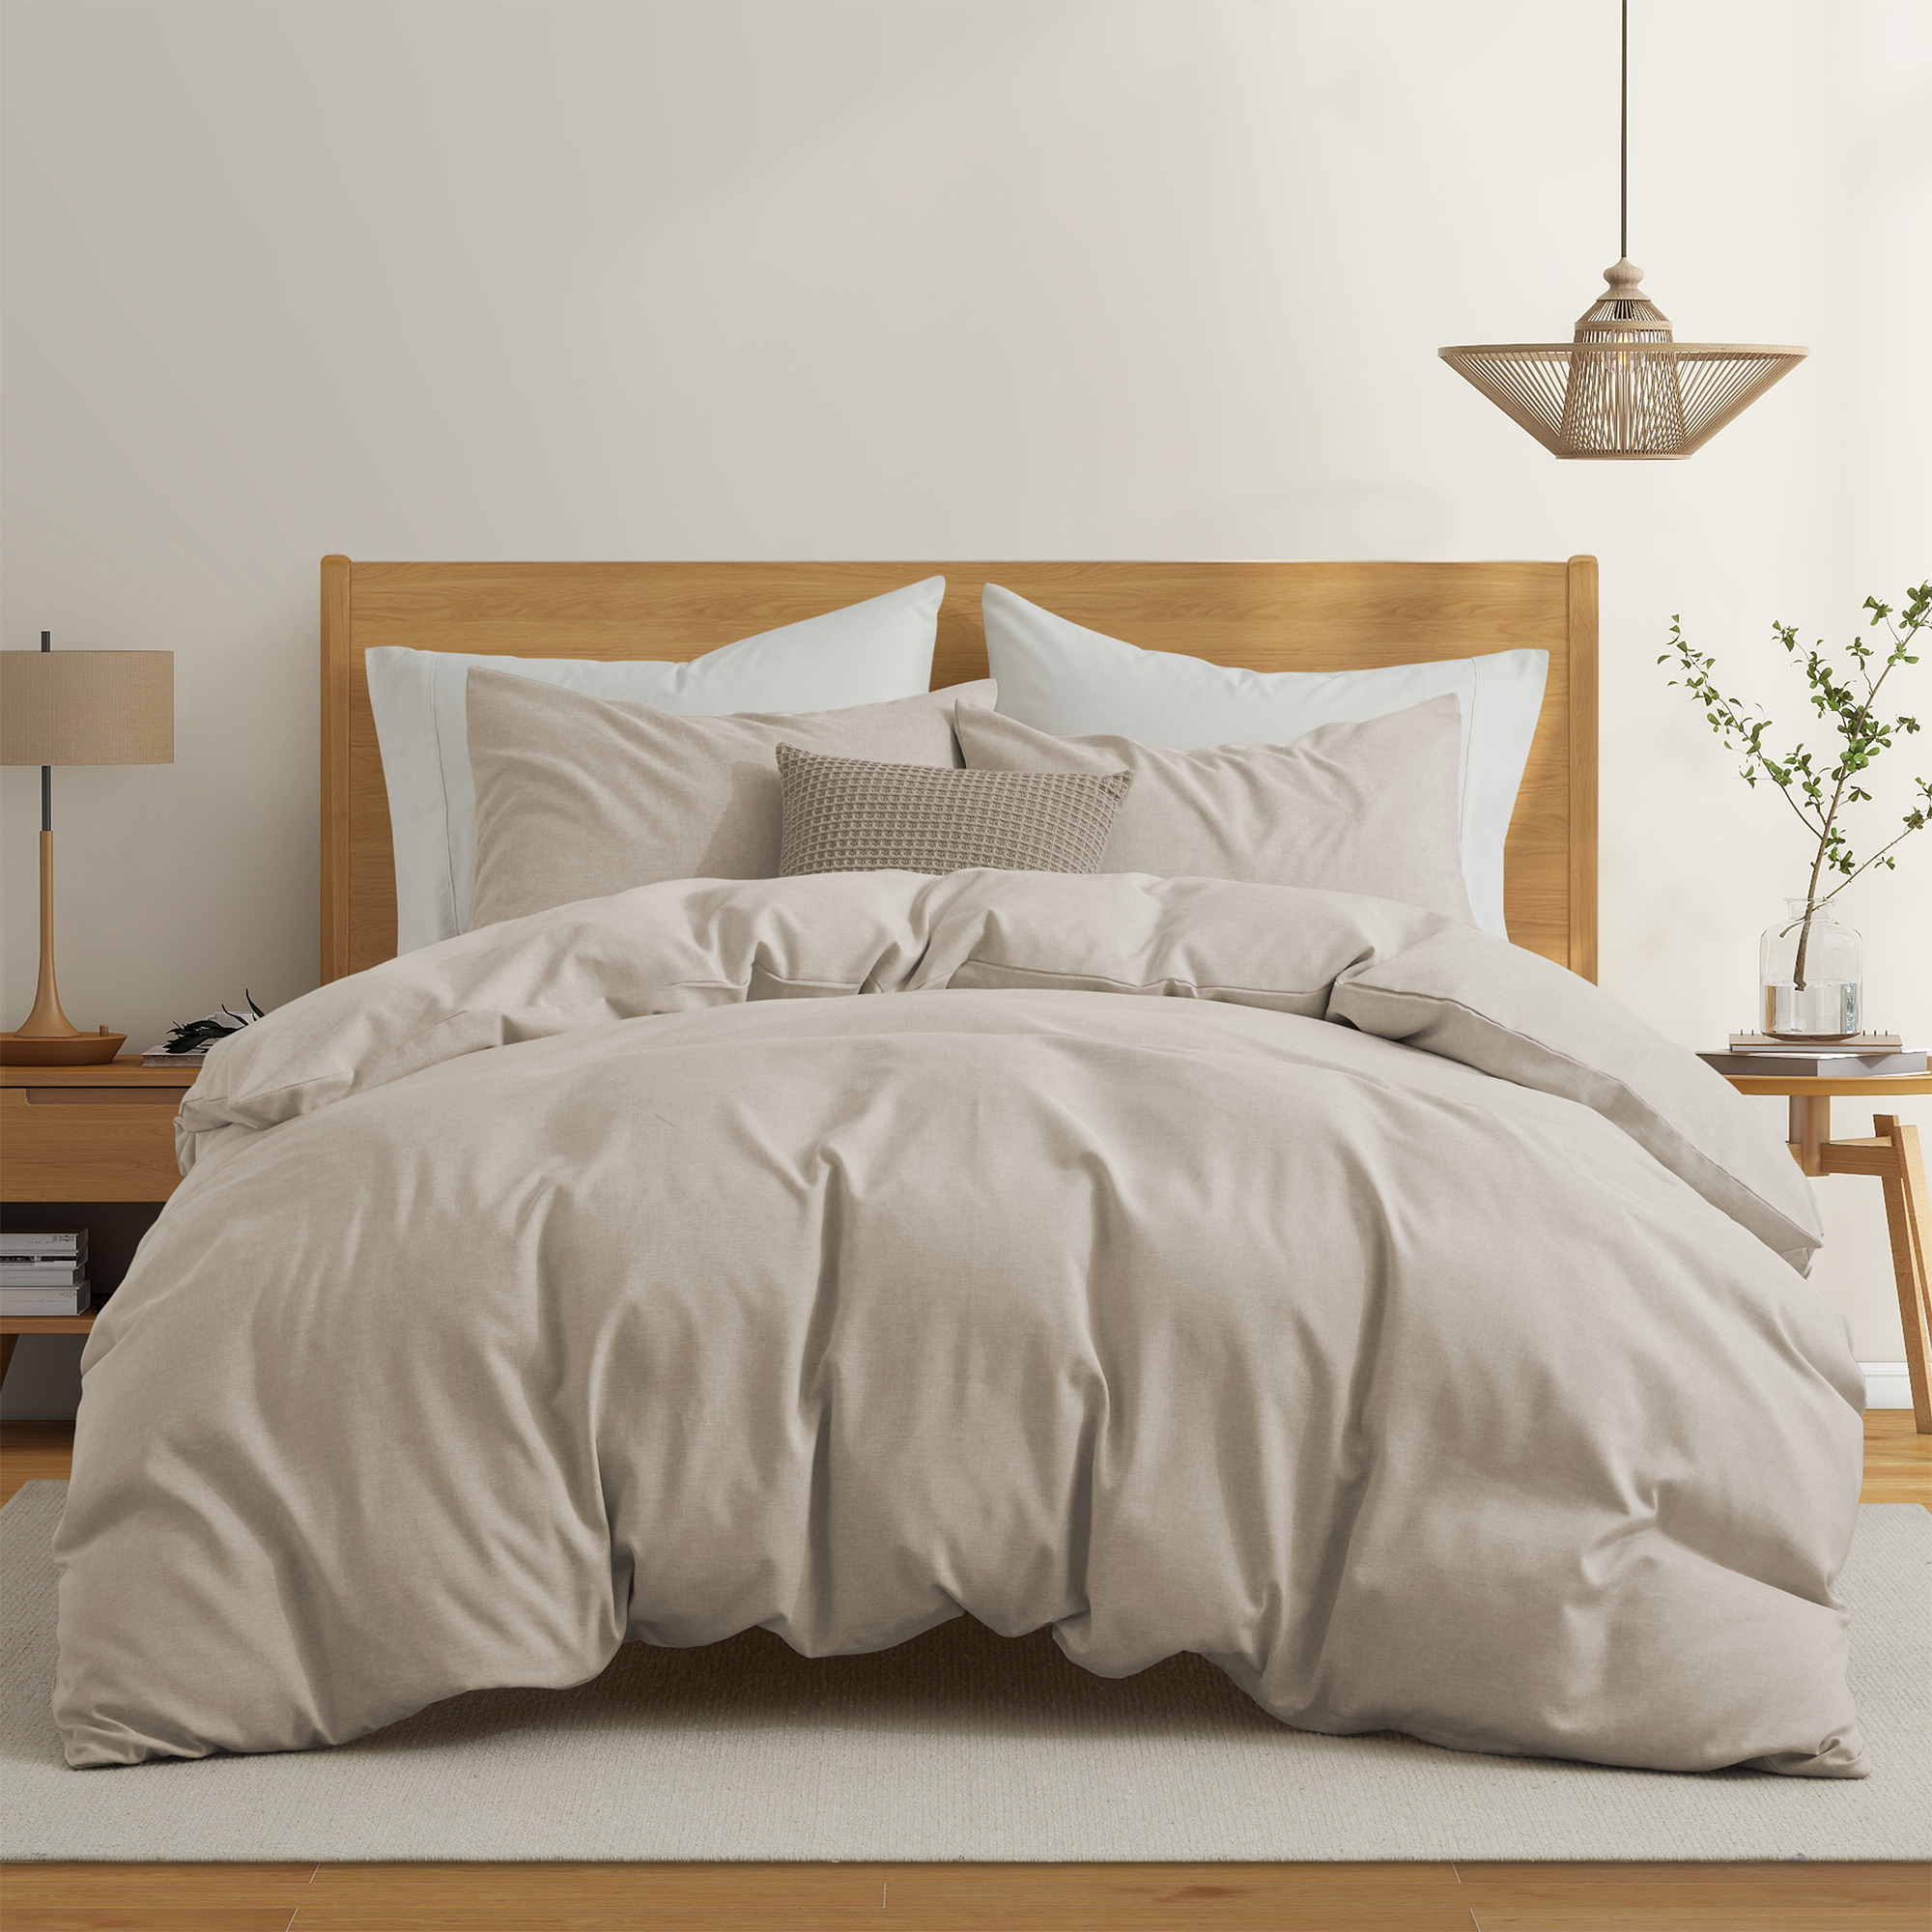 Solid Faux Linen Duvet Cover Set With Shams - Luxurious Comfort - Brown, Full/Queen-90x90